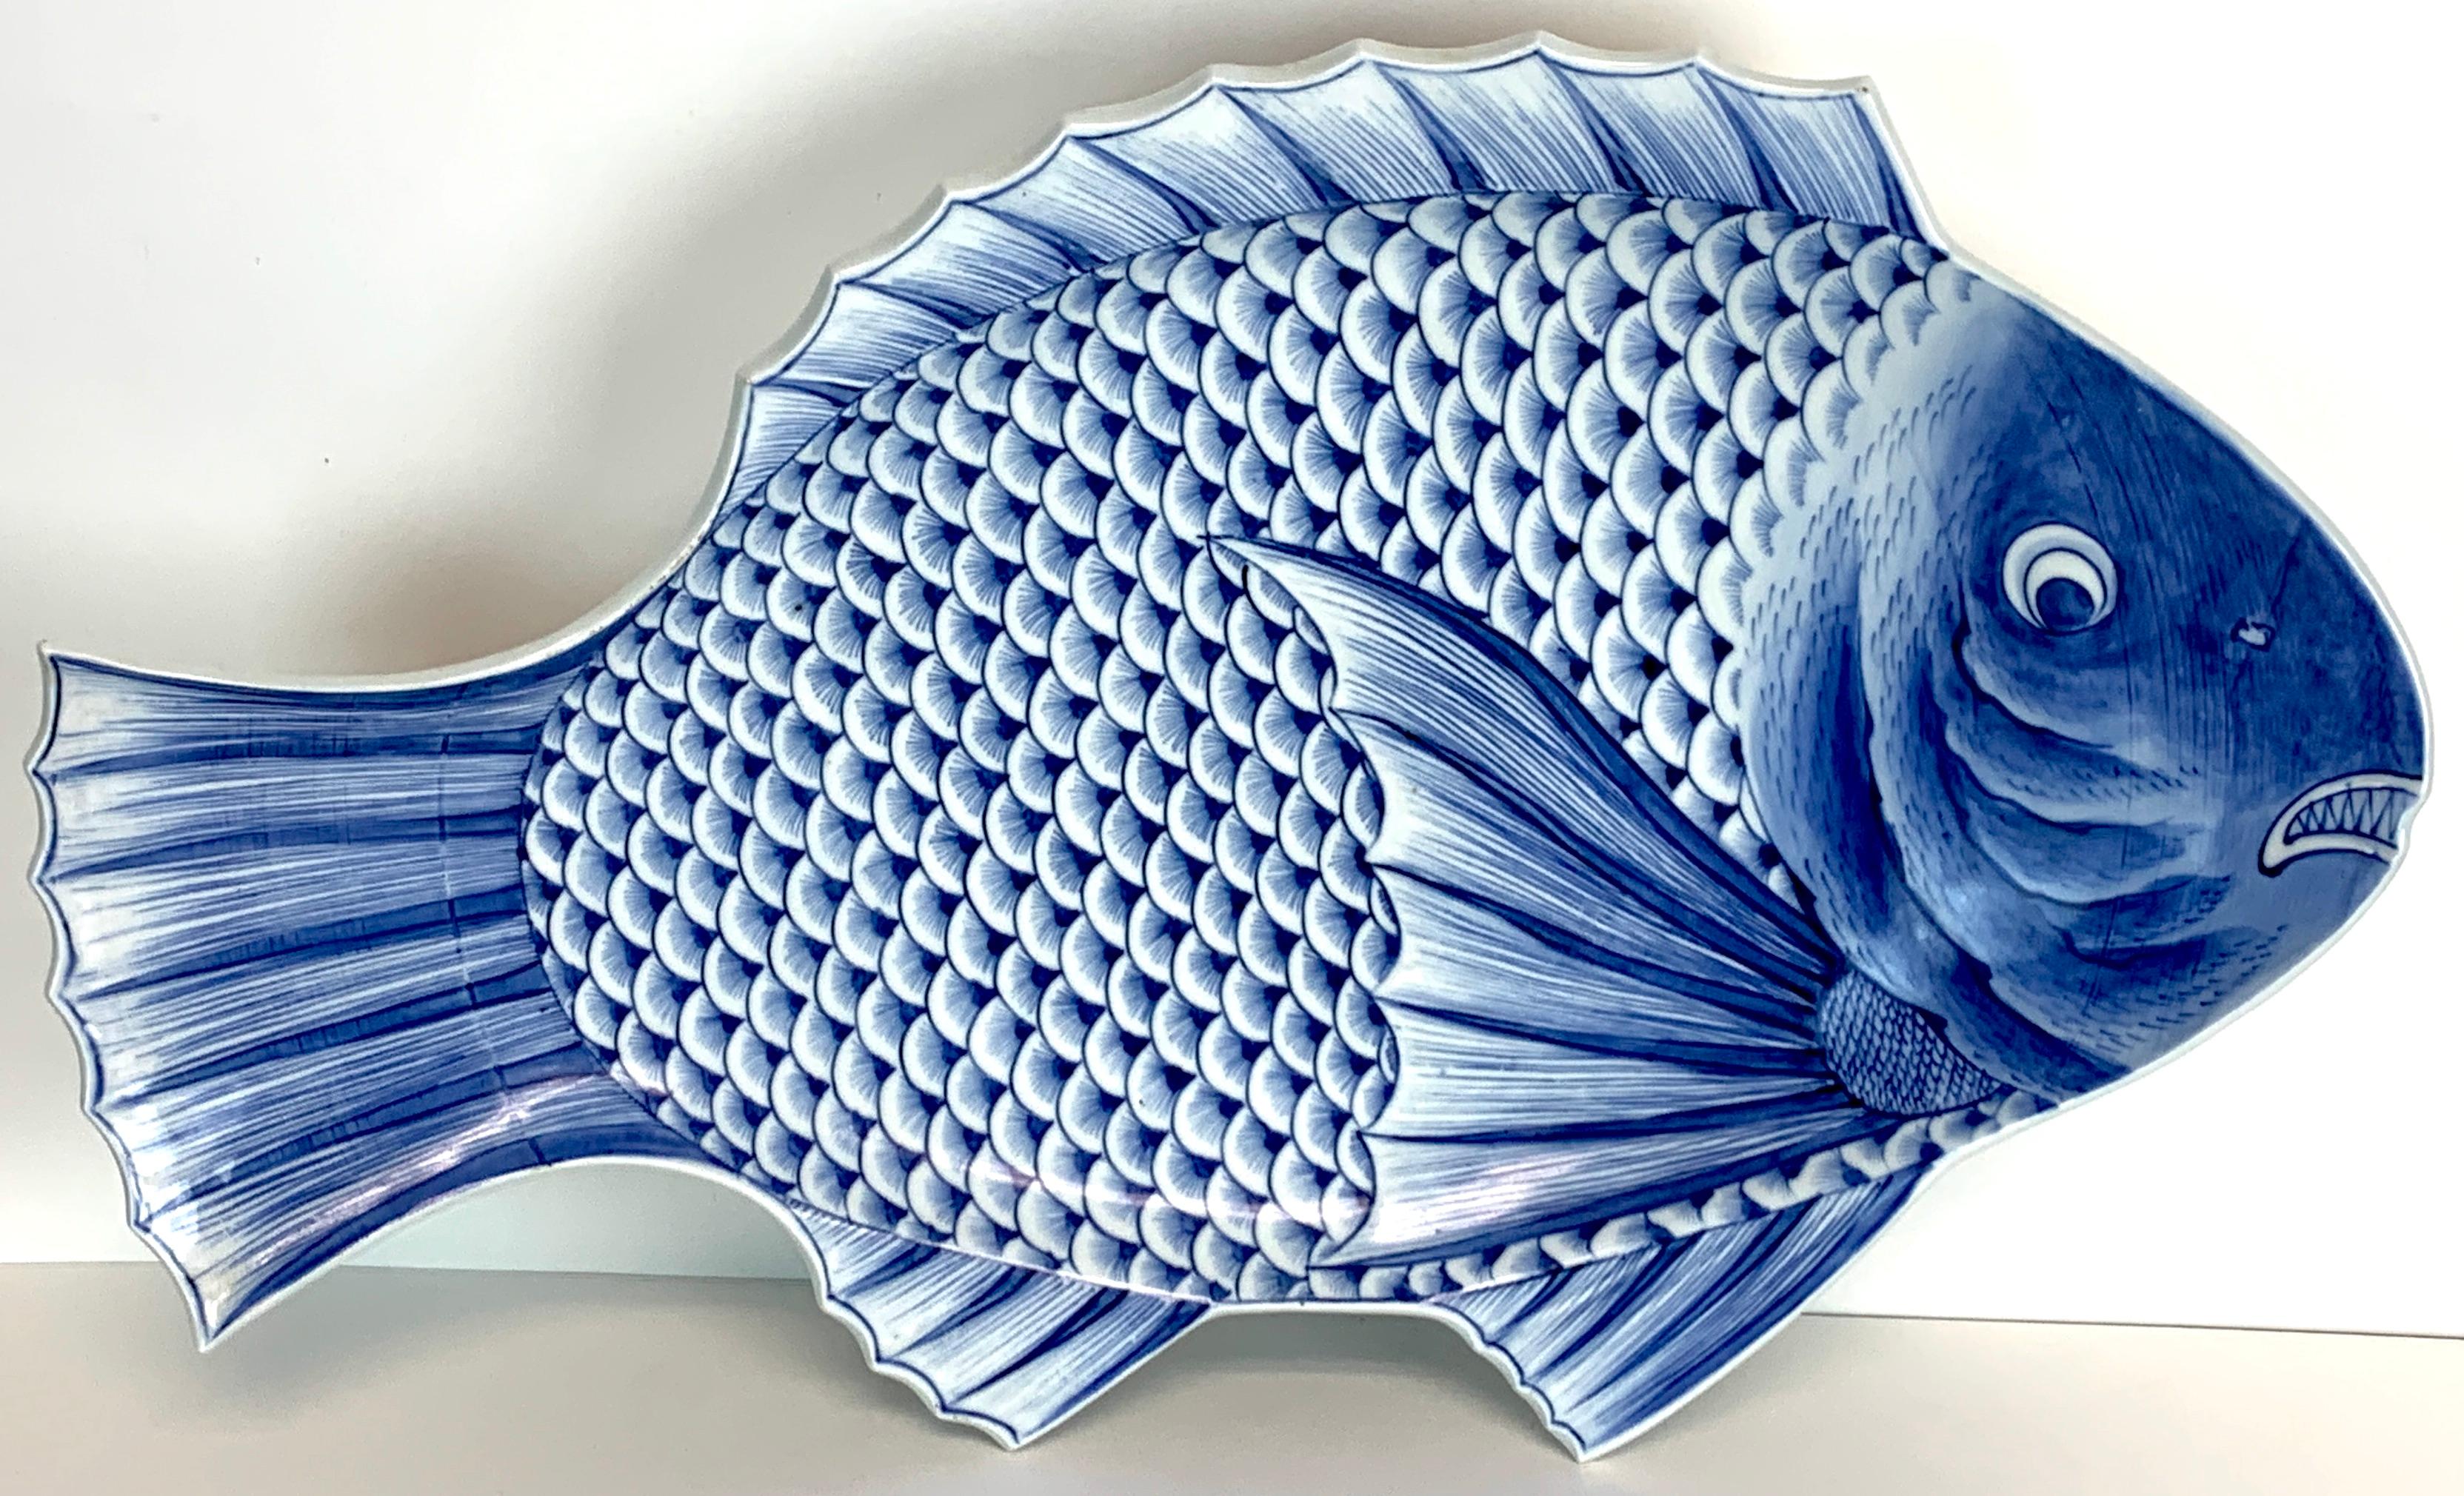 Large Meiji Imari blue and white fish plate, by Fukagawa VII
Subtle intricate decoration, a stunning example, marked, circa 1890
This examples measures: 18.5 inches wide x 12 inches high.
Part of a collection of eight fine Imari examples, the VII